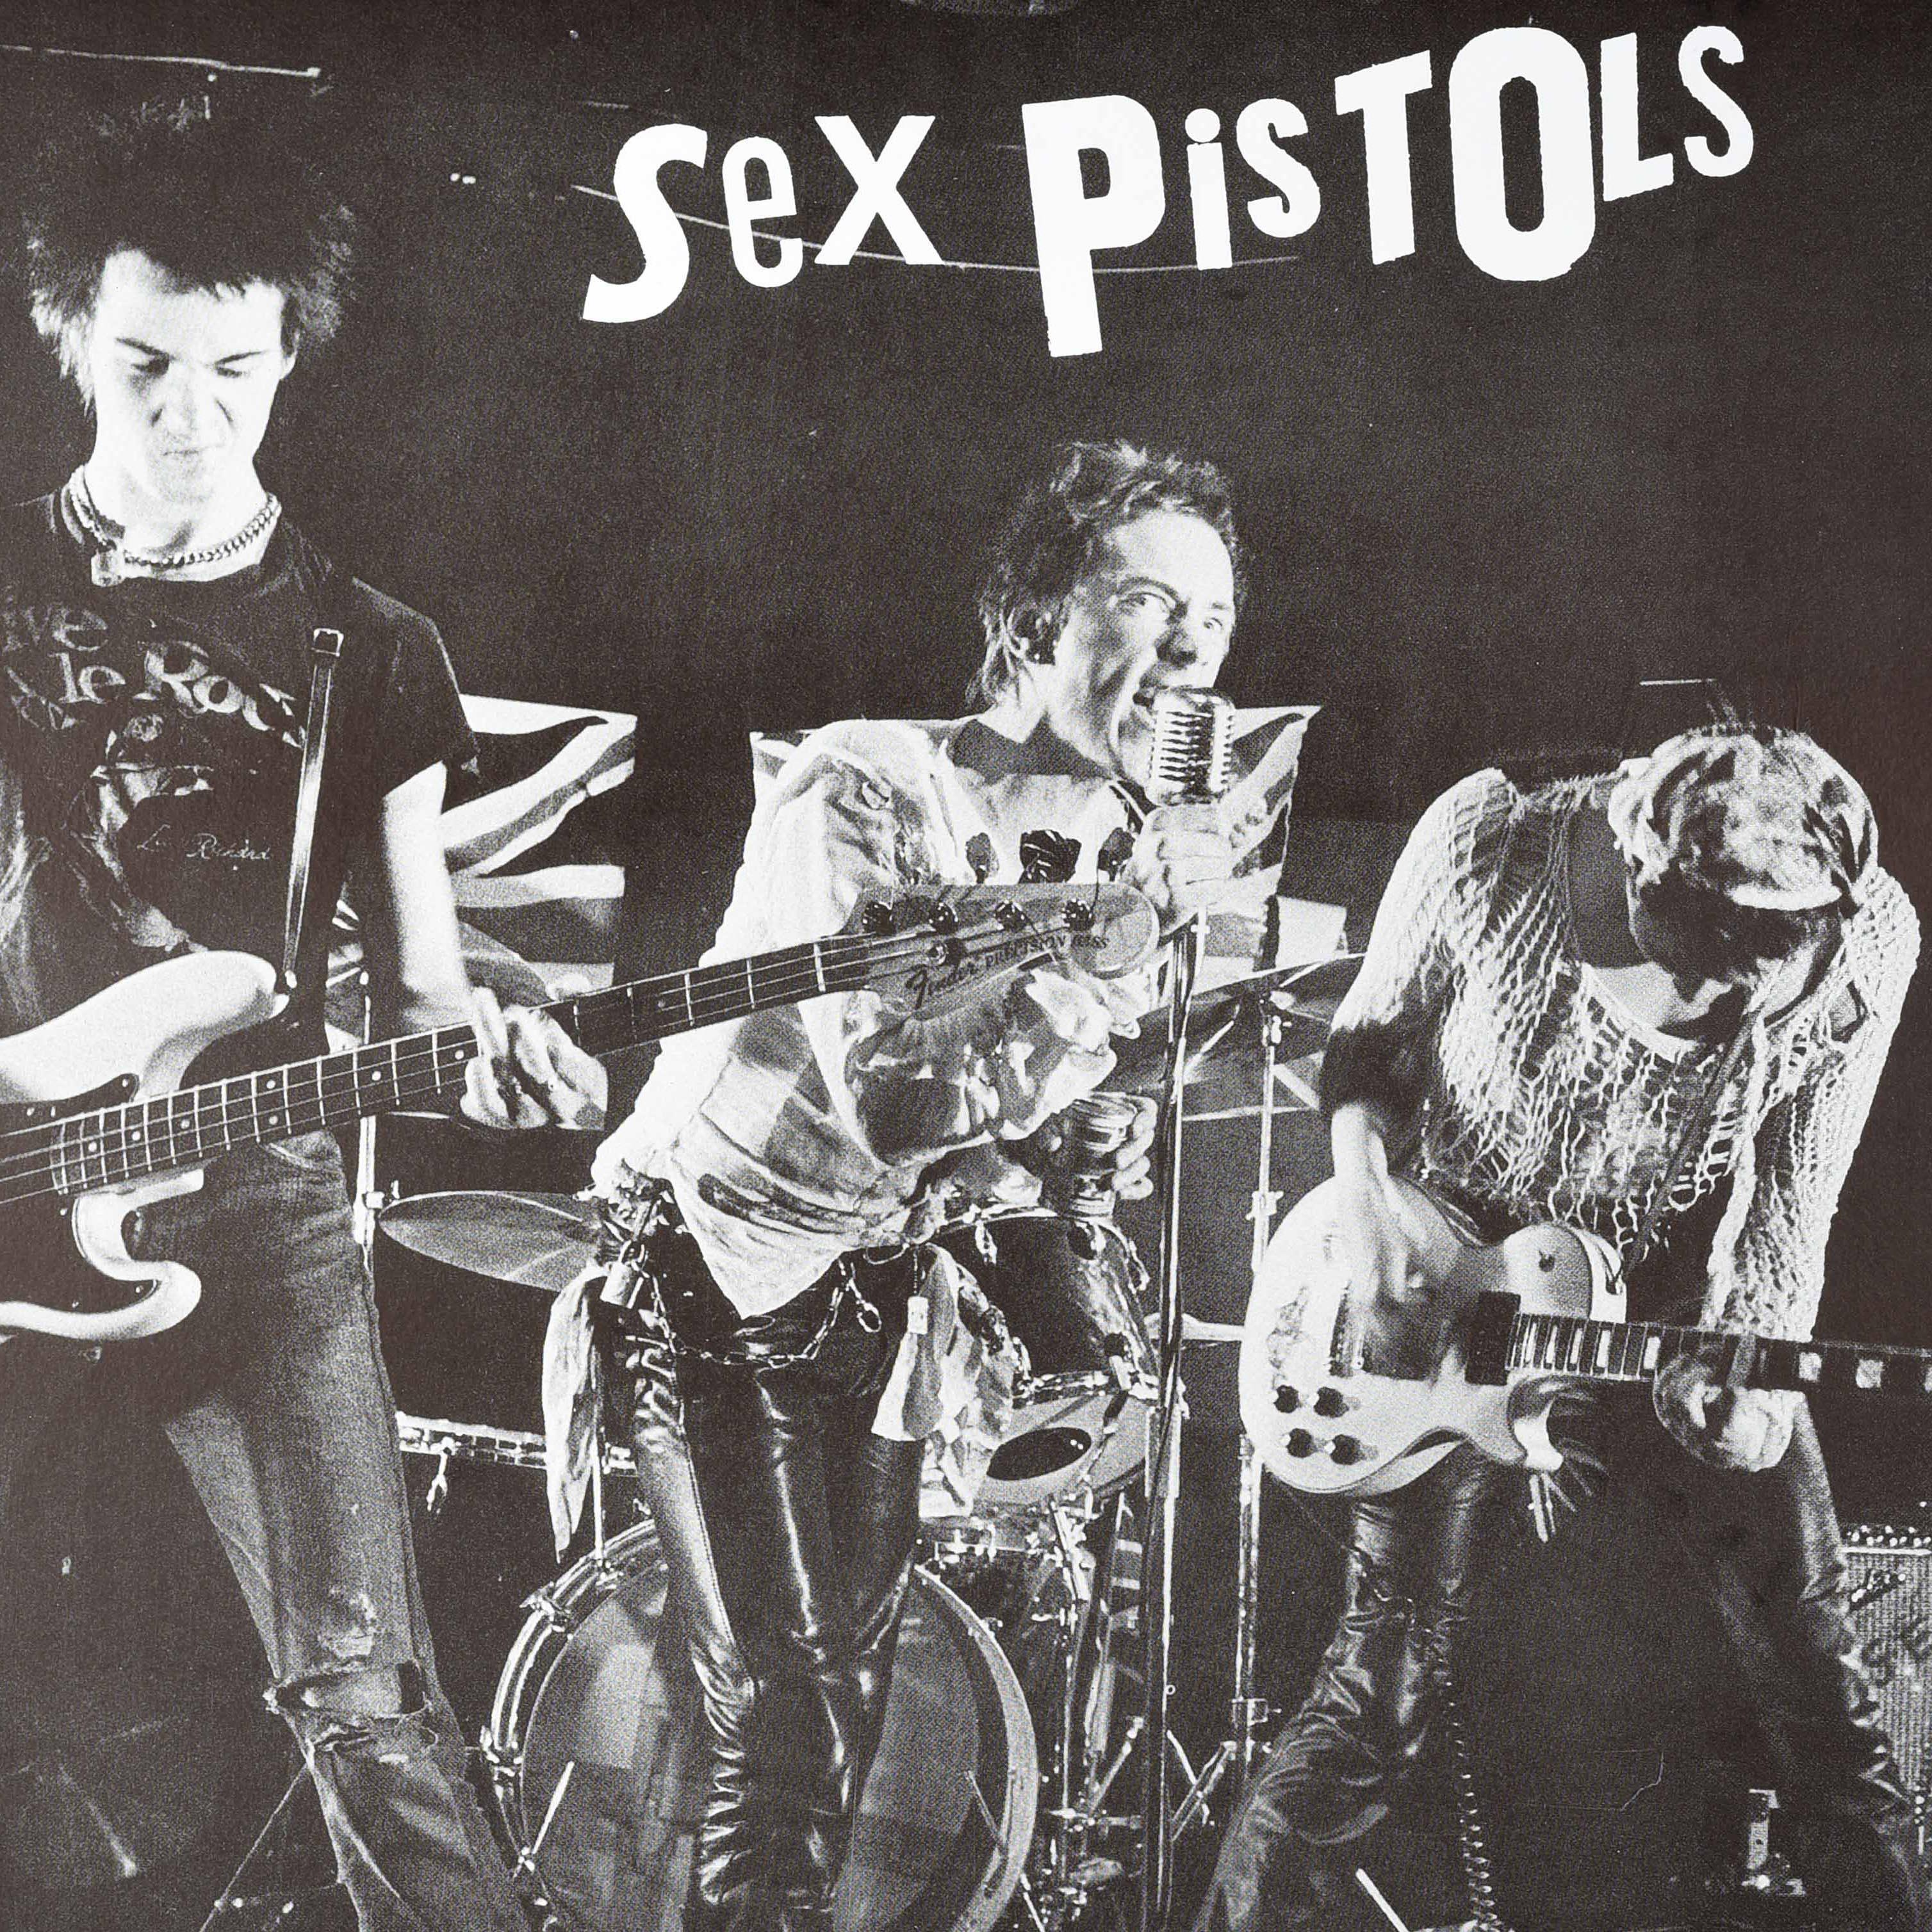 Original Vintage Advertising Poster Sex Pistols Anarchy In The UK Punk Music Art - Print by Unknown